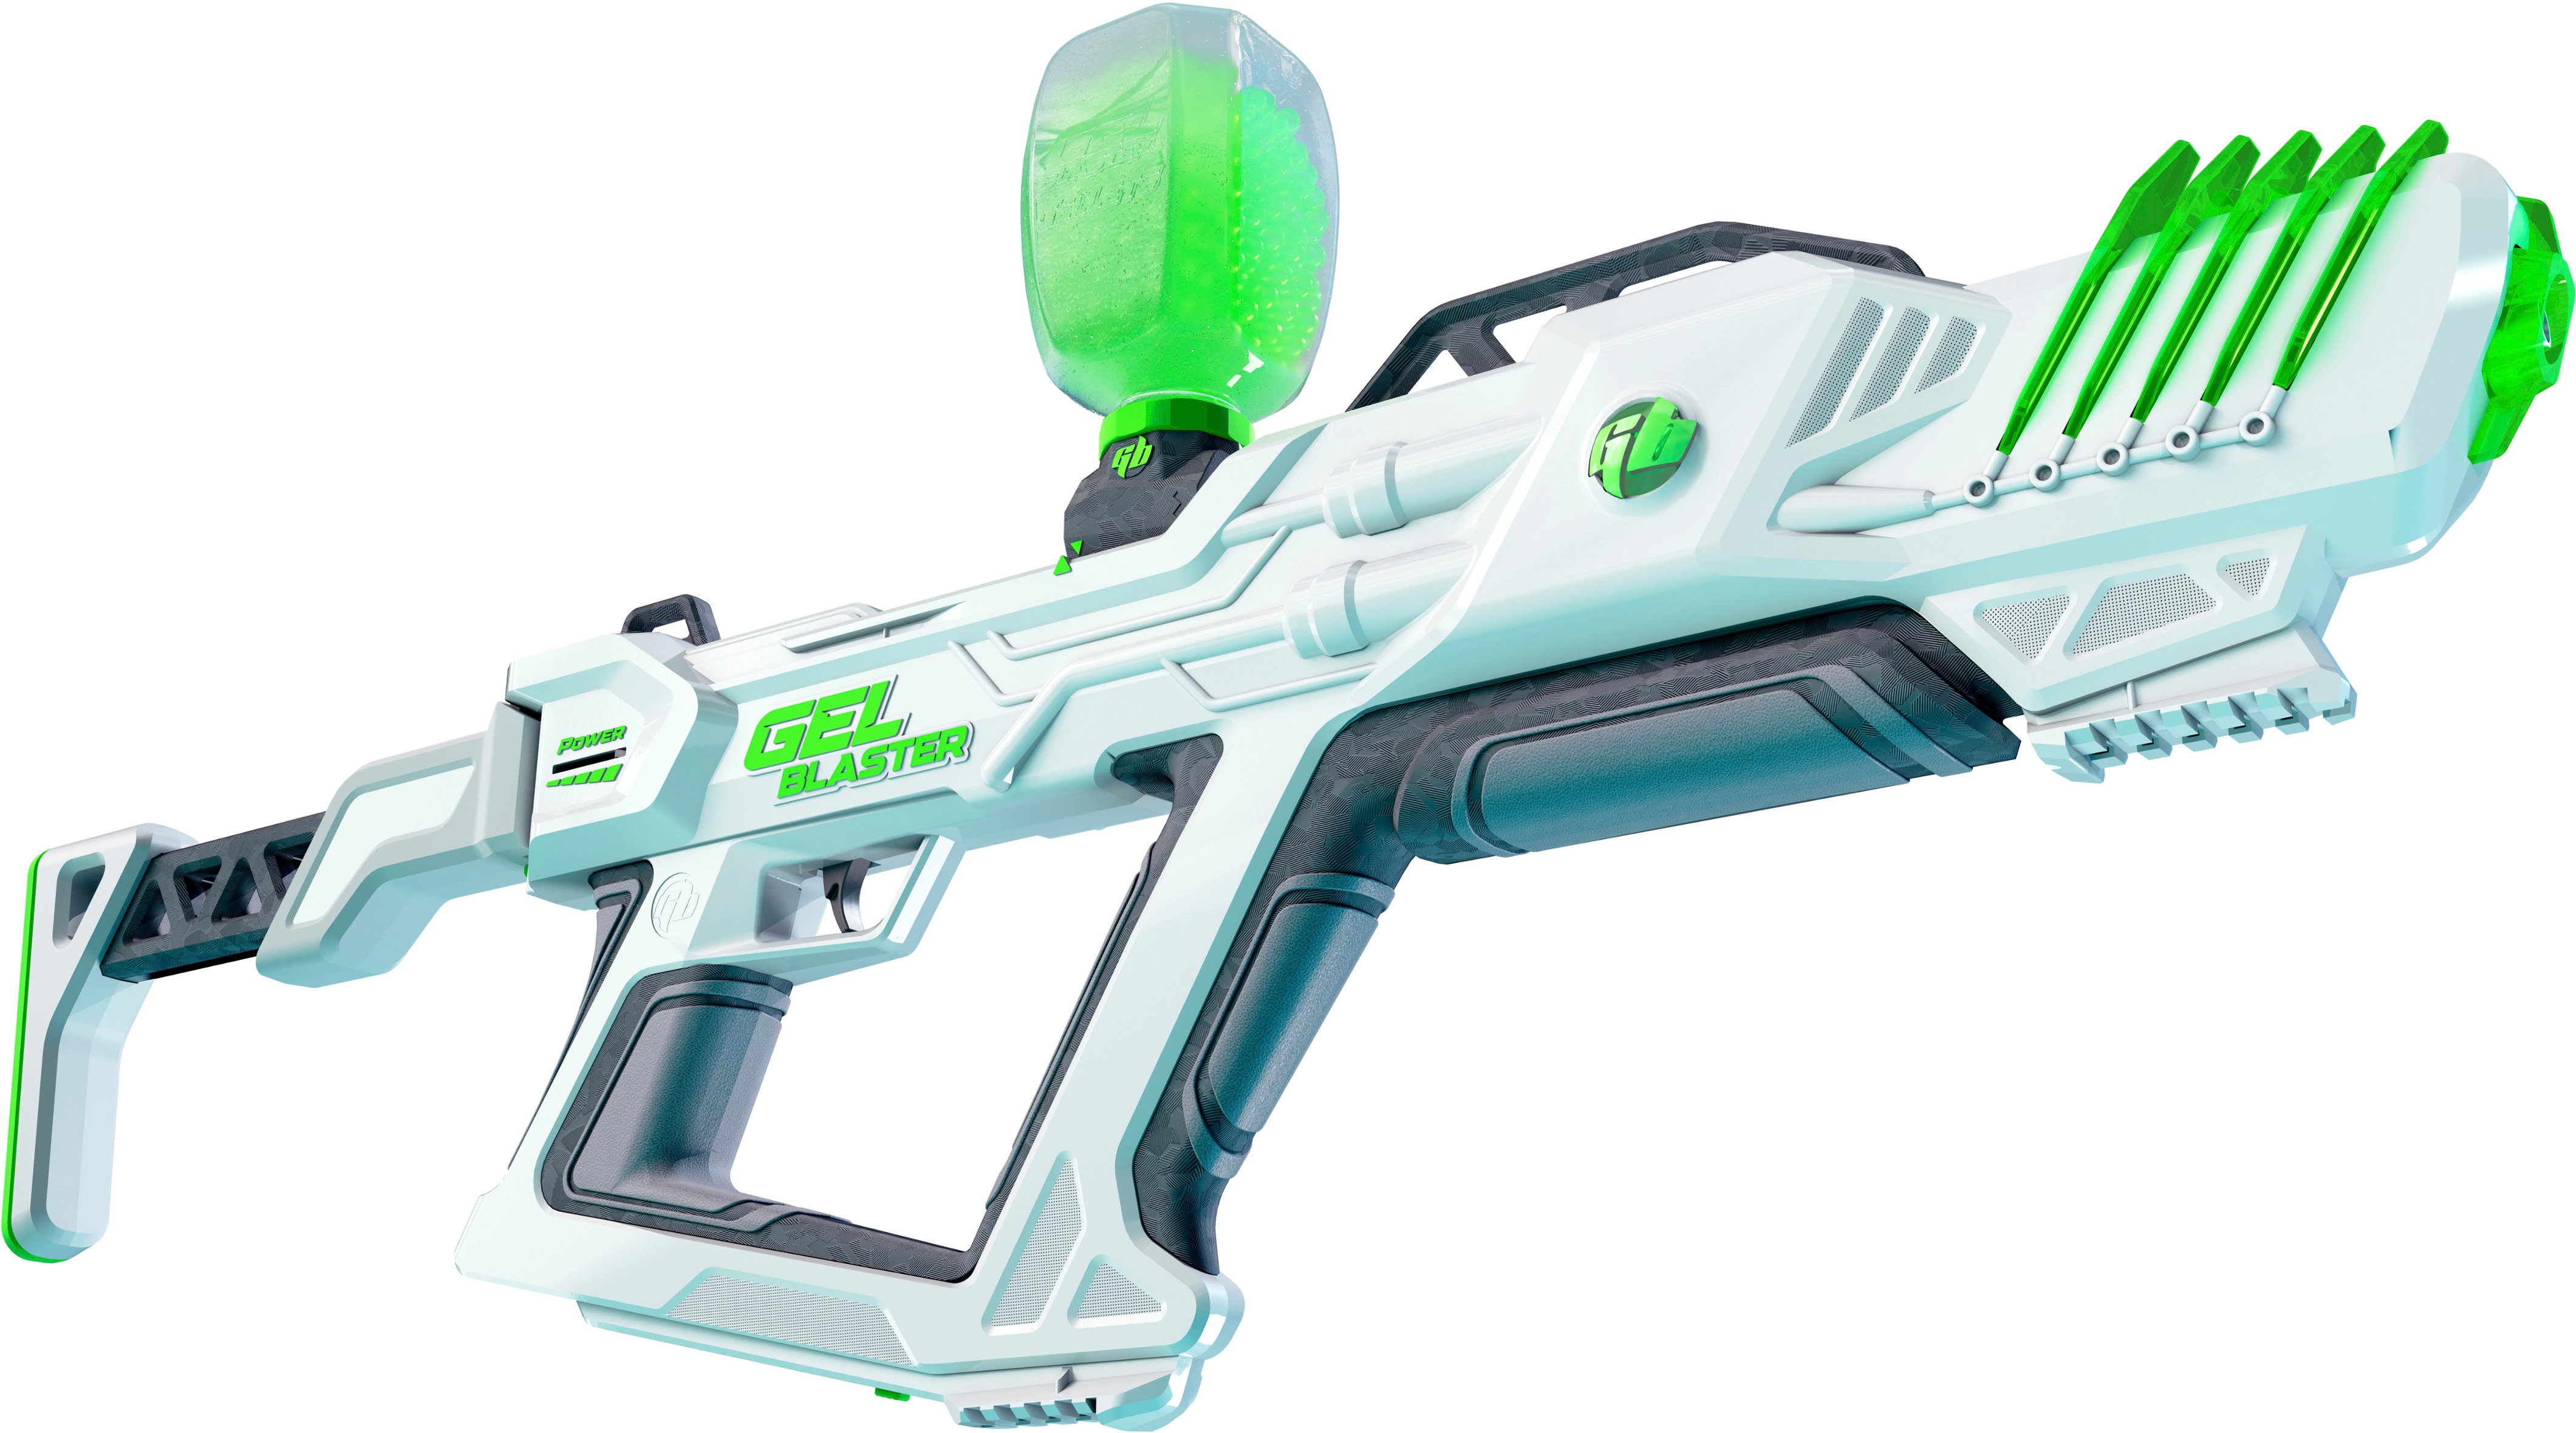 The Original Gel Blaster Surge - Extended 100+ Foot Range - Toy Gel  Blasters with Water Based Beads - Semi & Automatic Modes with Powerful 170  FPS 